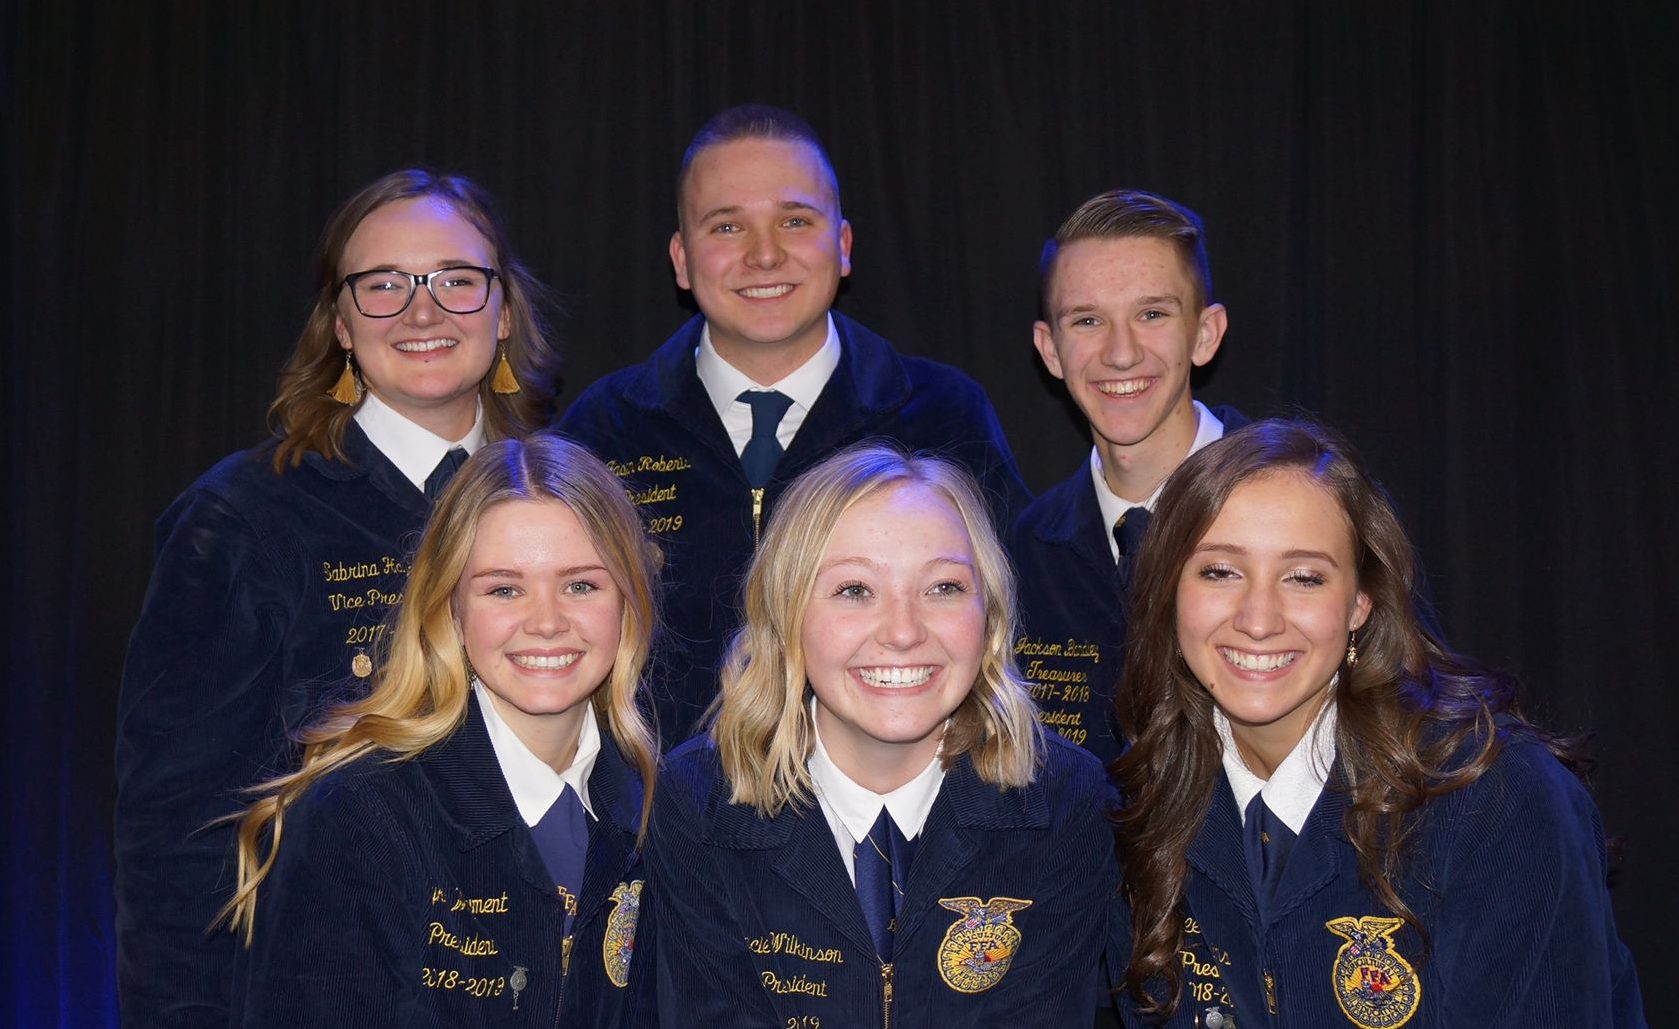 Newly elected state FFA officers  include 2 recent 